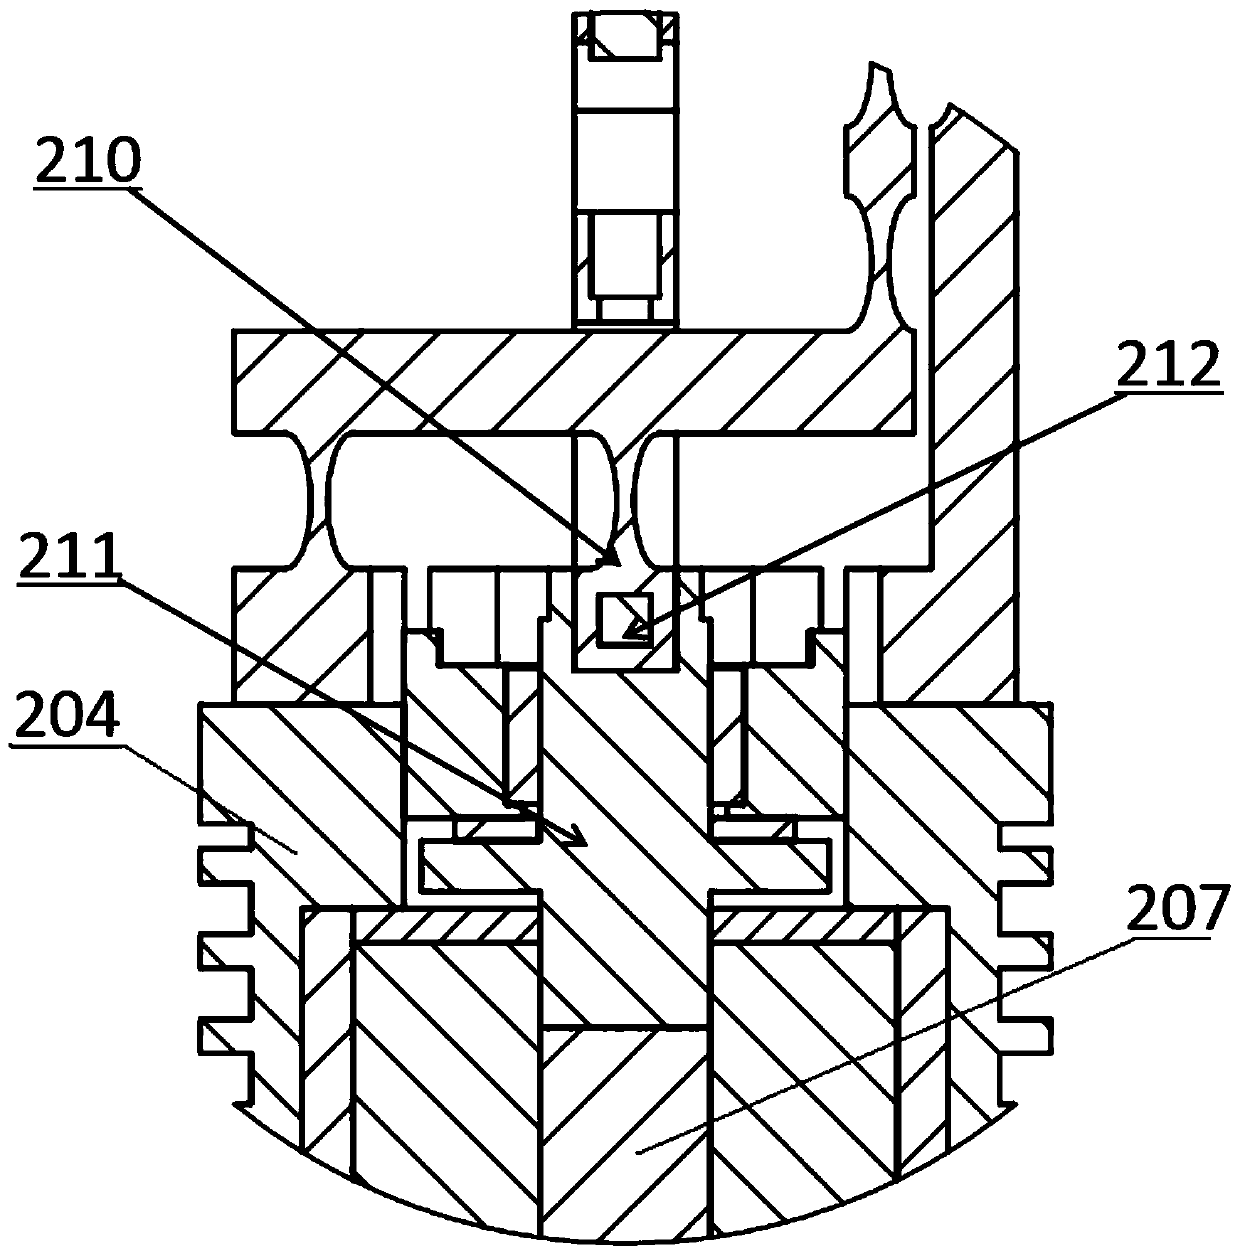 Three-degree-of-freedom decoupling ultra-precise large-stroke positioning and vibration excitation device